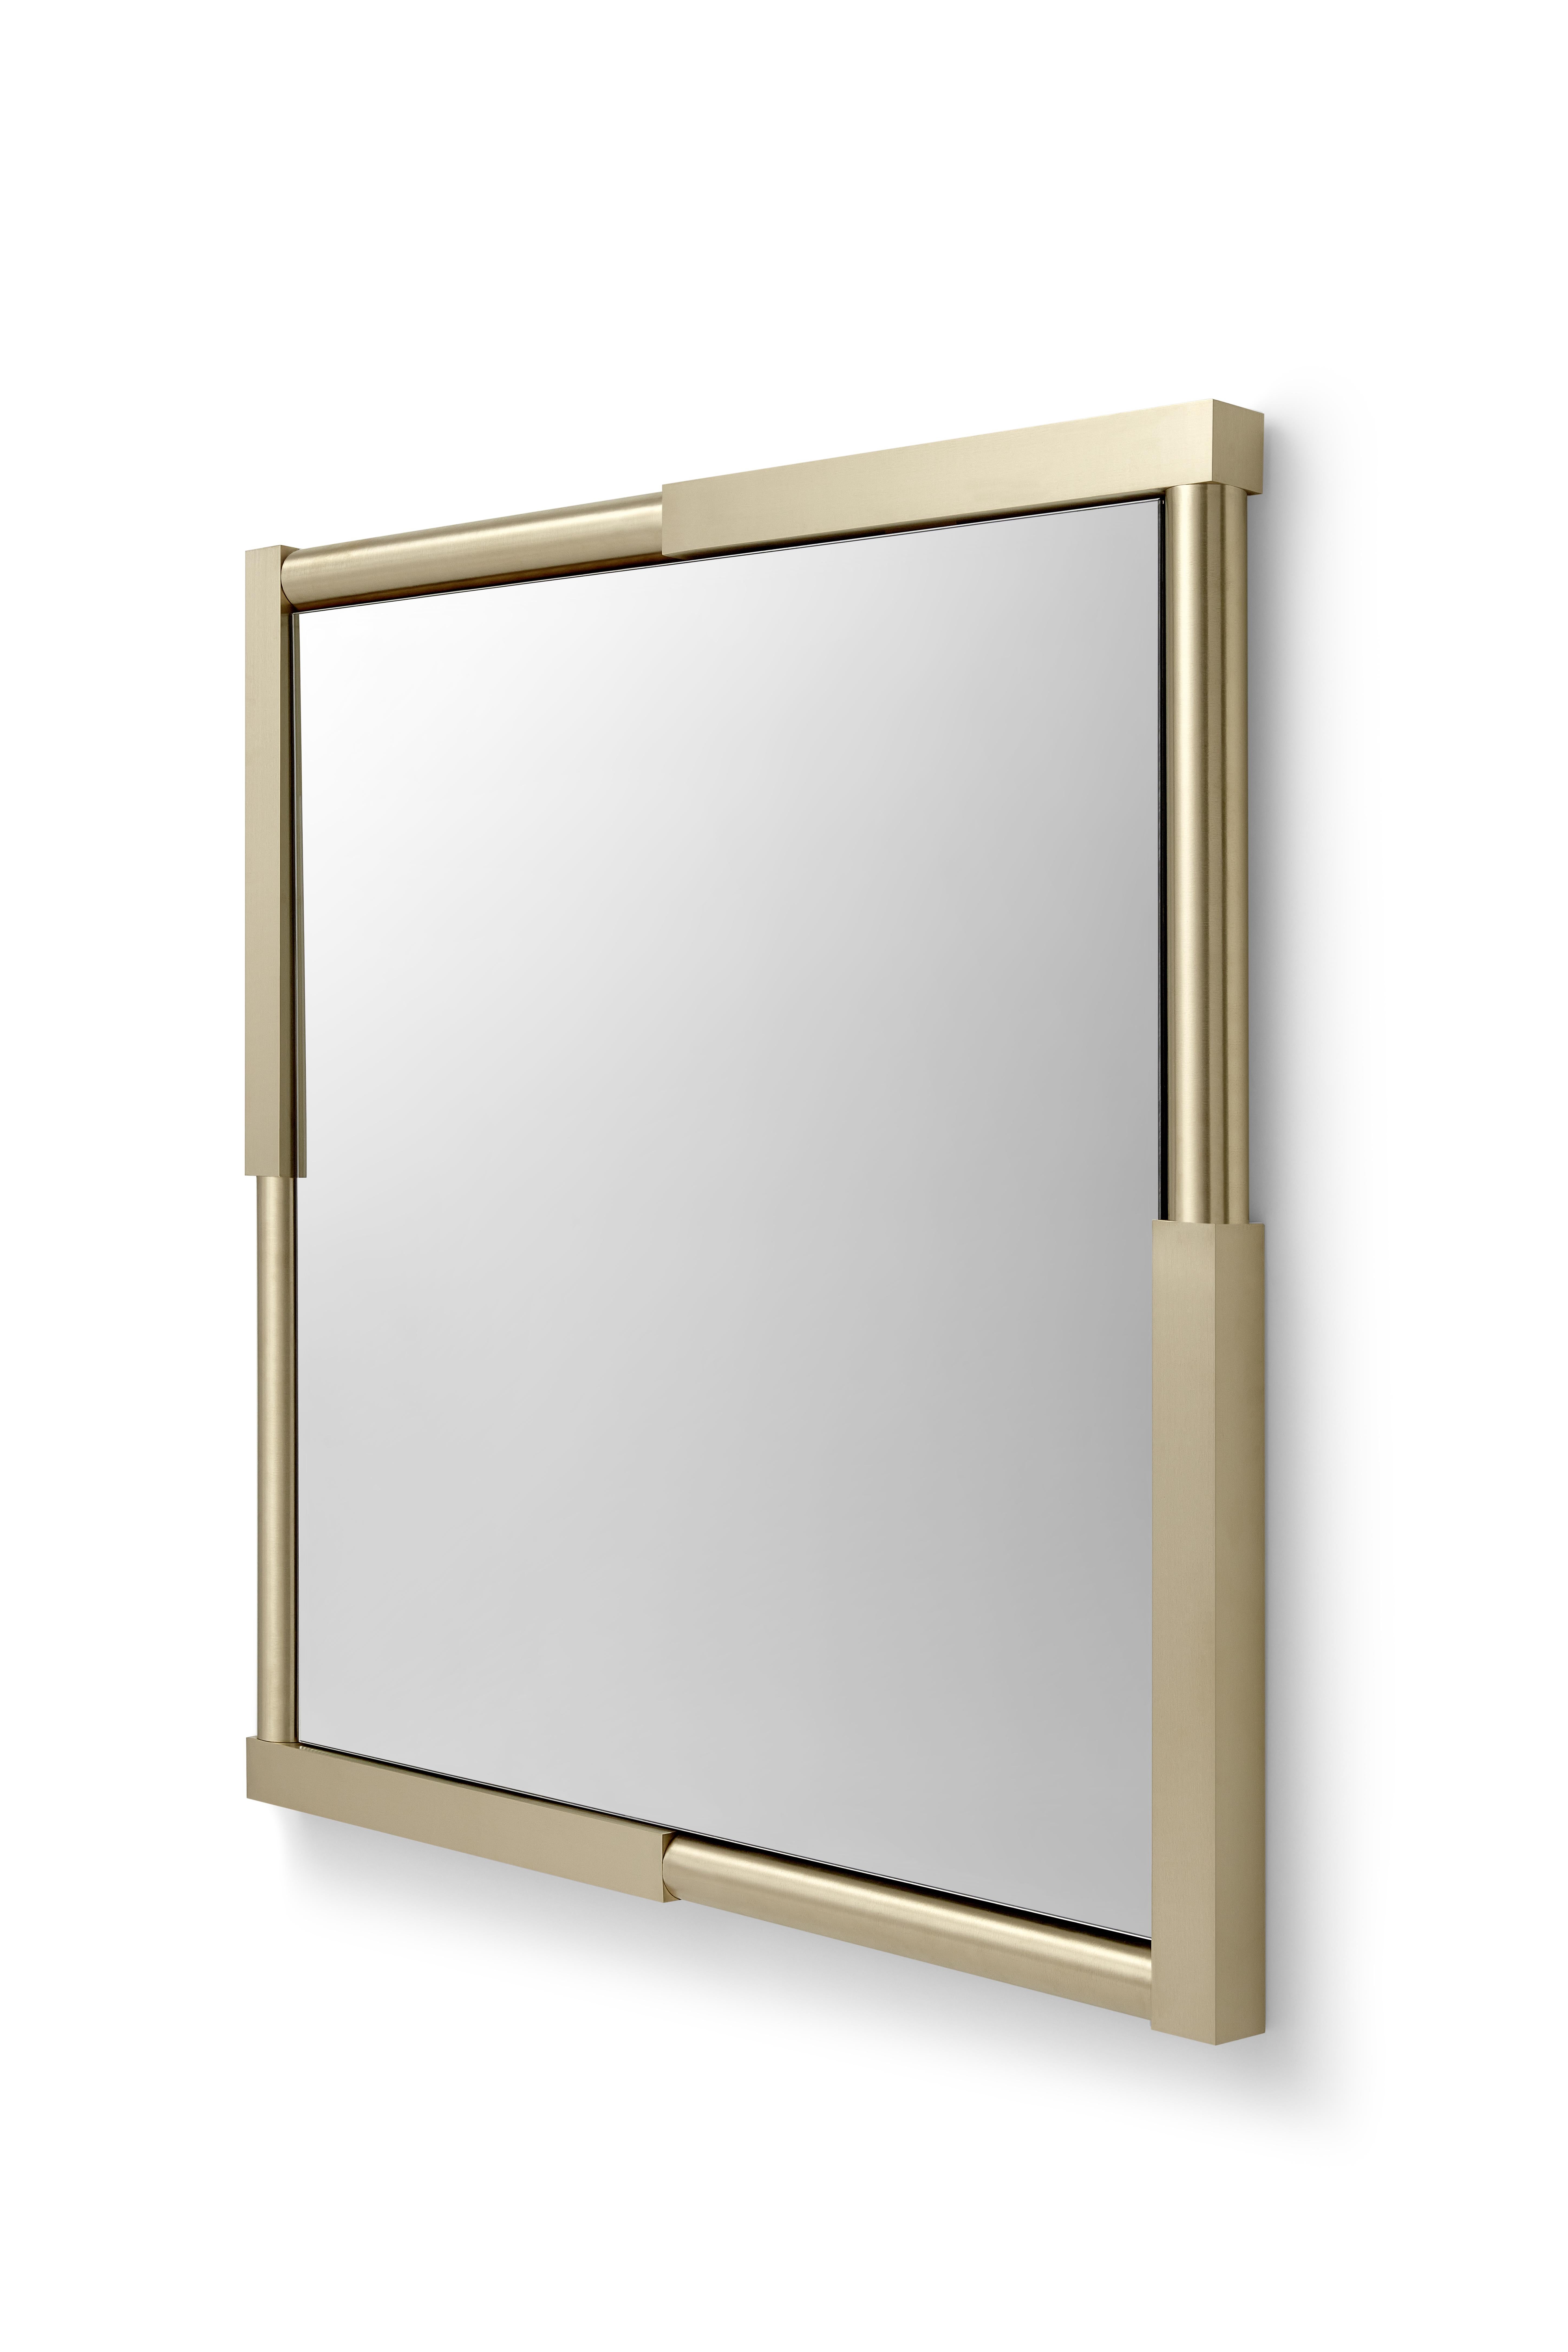 Organic Modern 'Sequence' Square Mirror by Marta Delgado, Brushed Brass For Sale